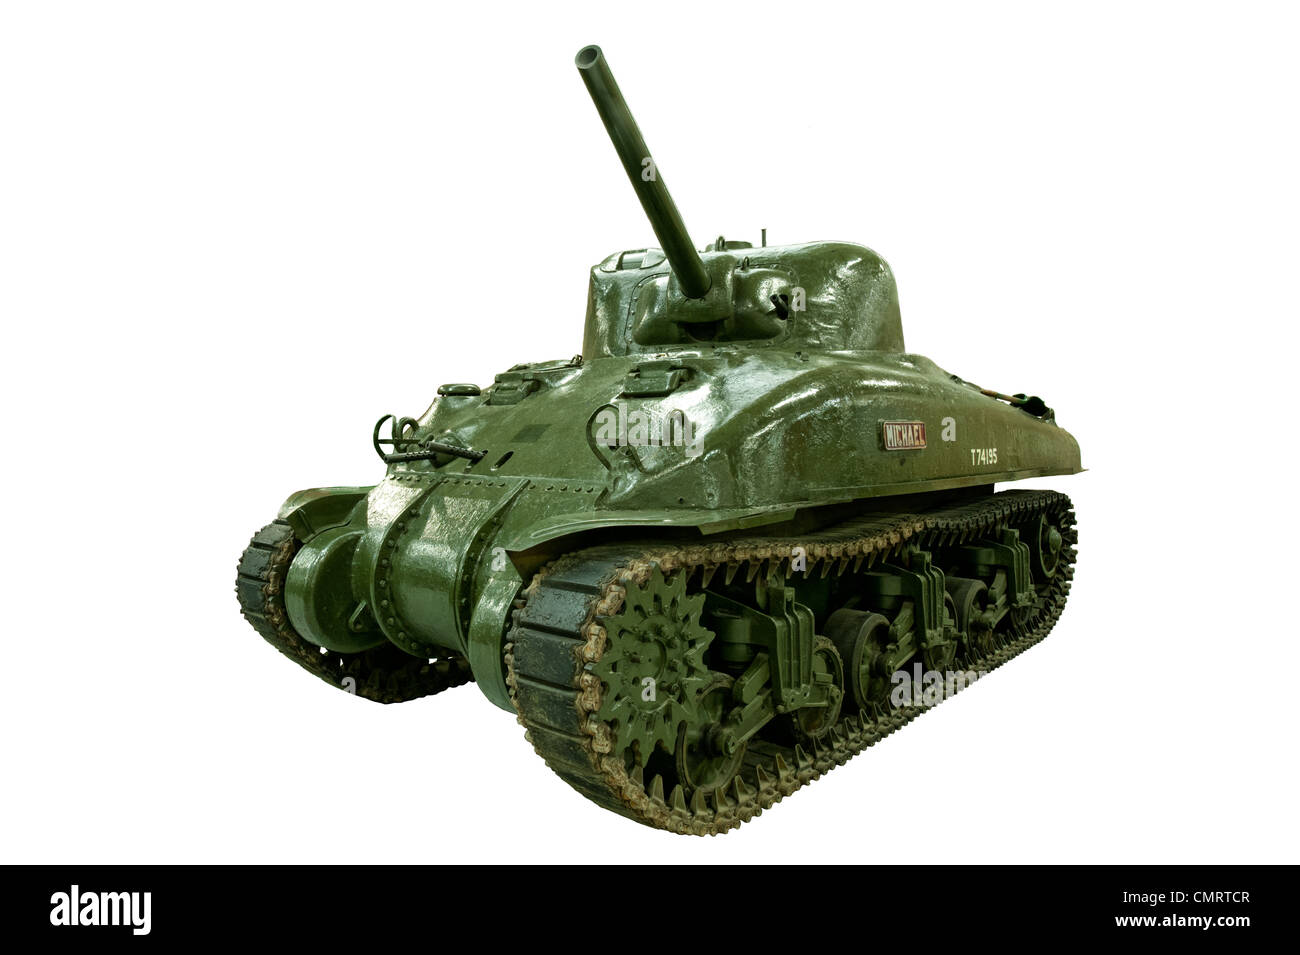 M4a1 Tank Cut Out Stock Images And Pictures Alamy